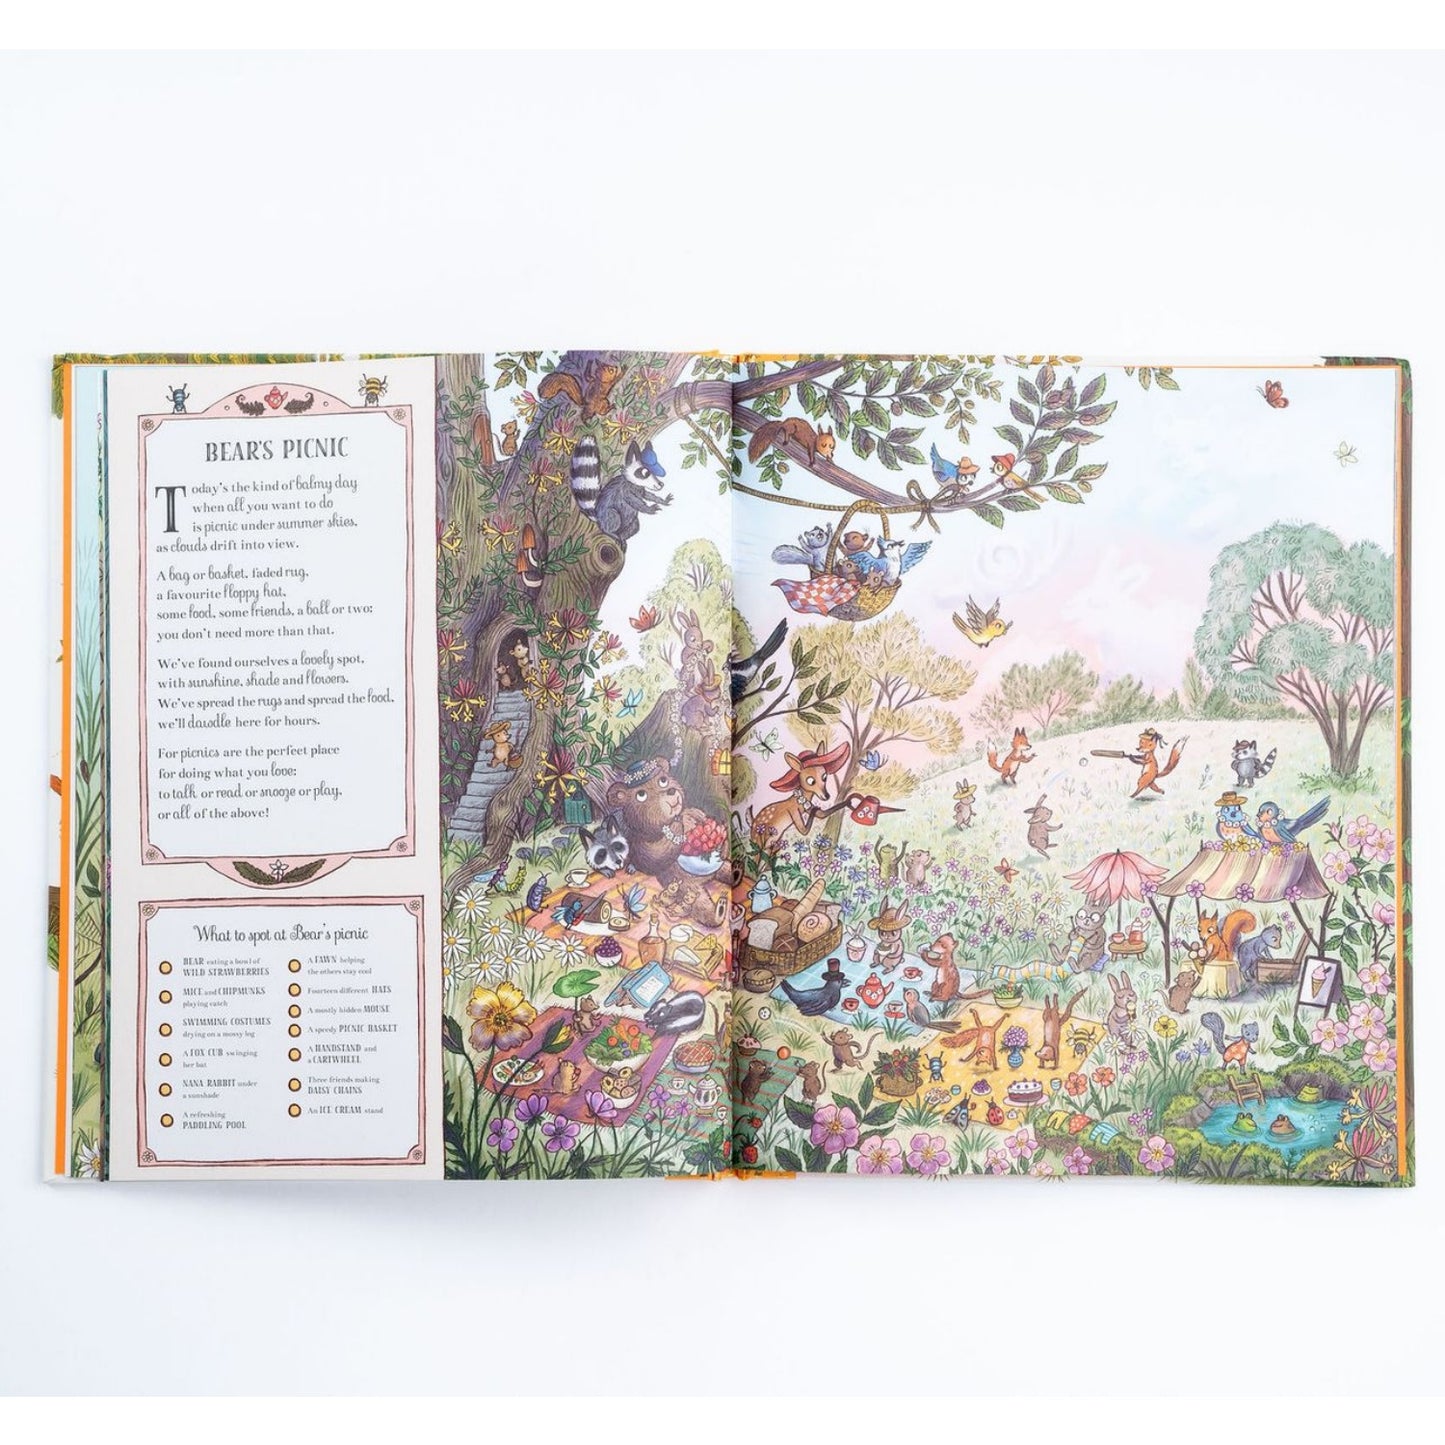 If You Go Down to the Woods Today | Hardcover | Children’s Book on Nature